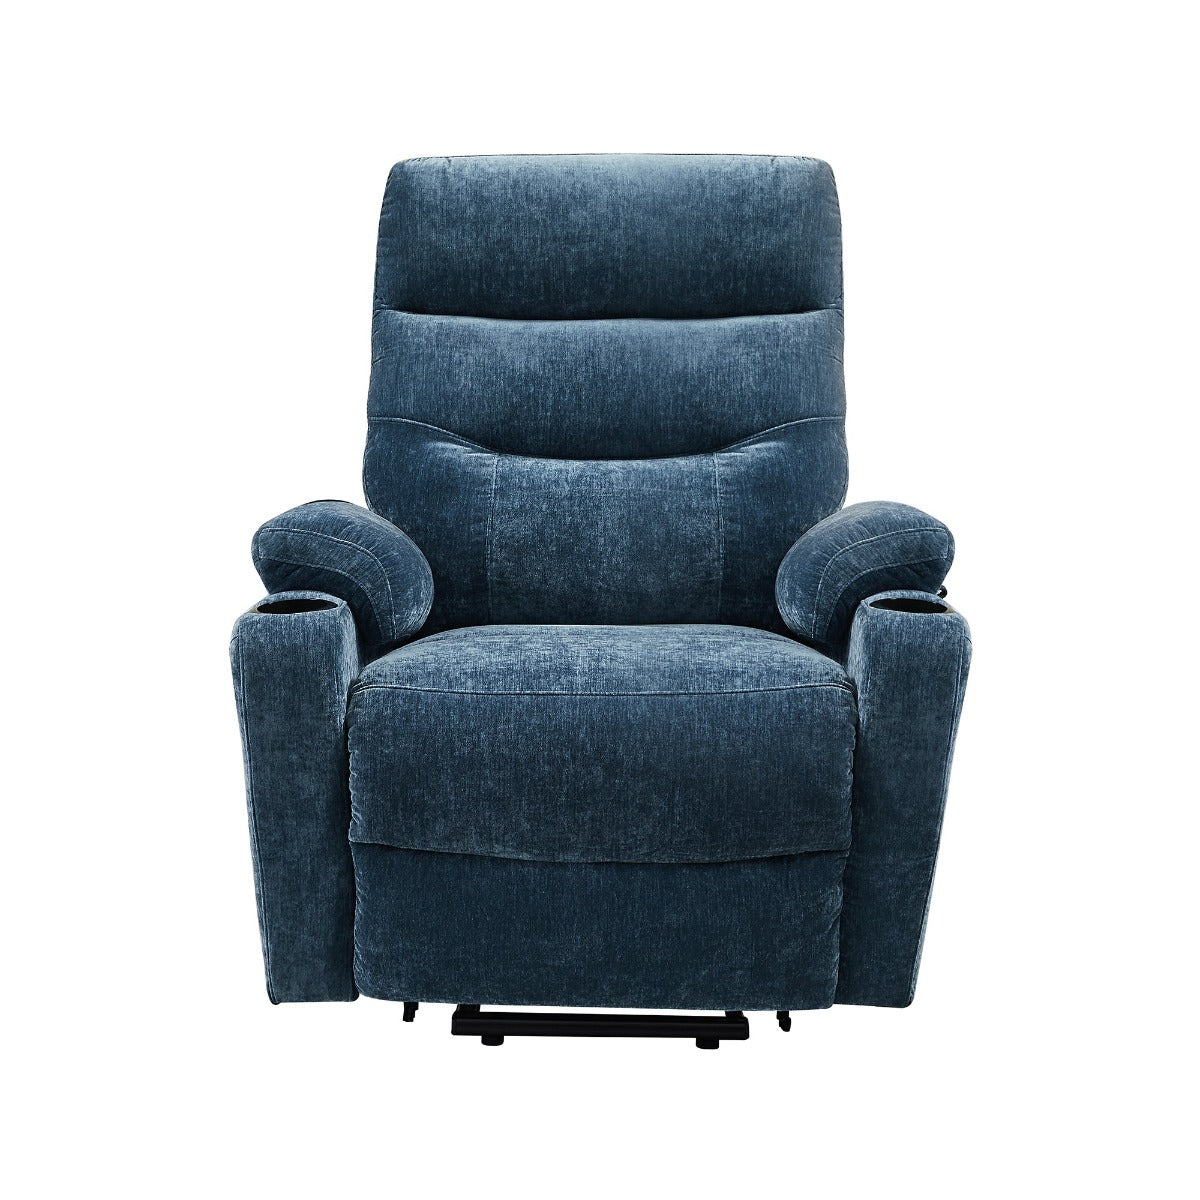 Liyasi Power Lift Recliner Chair with Massage and Heat, front view - My Lift Chair